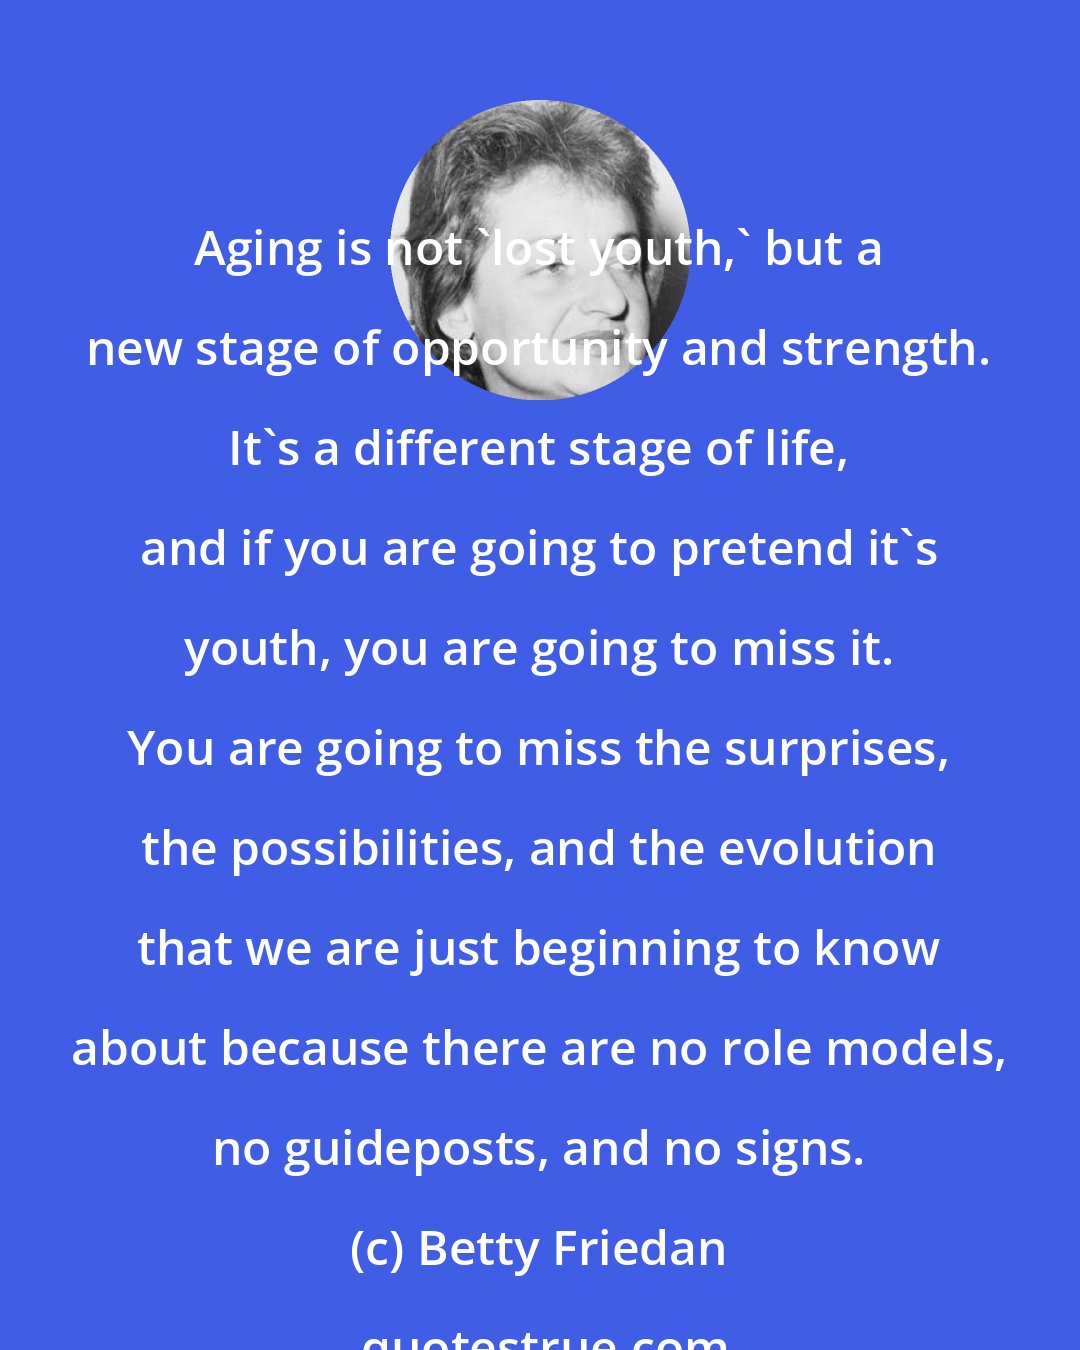 Betty Friedan: Aging is not 'lost youth,' but a new stage of opportunity and strength. It's a different stage of life, and if you are going to pretend it's youth, you are going to miss it. You are going to miss the surprises, the possibilities, and the evolution that we are just beginning to know about because there are no role models, no guideposts, and no signs.